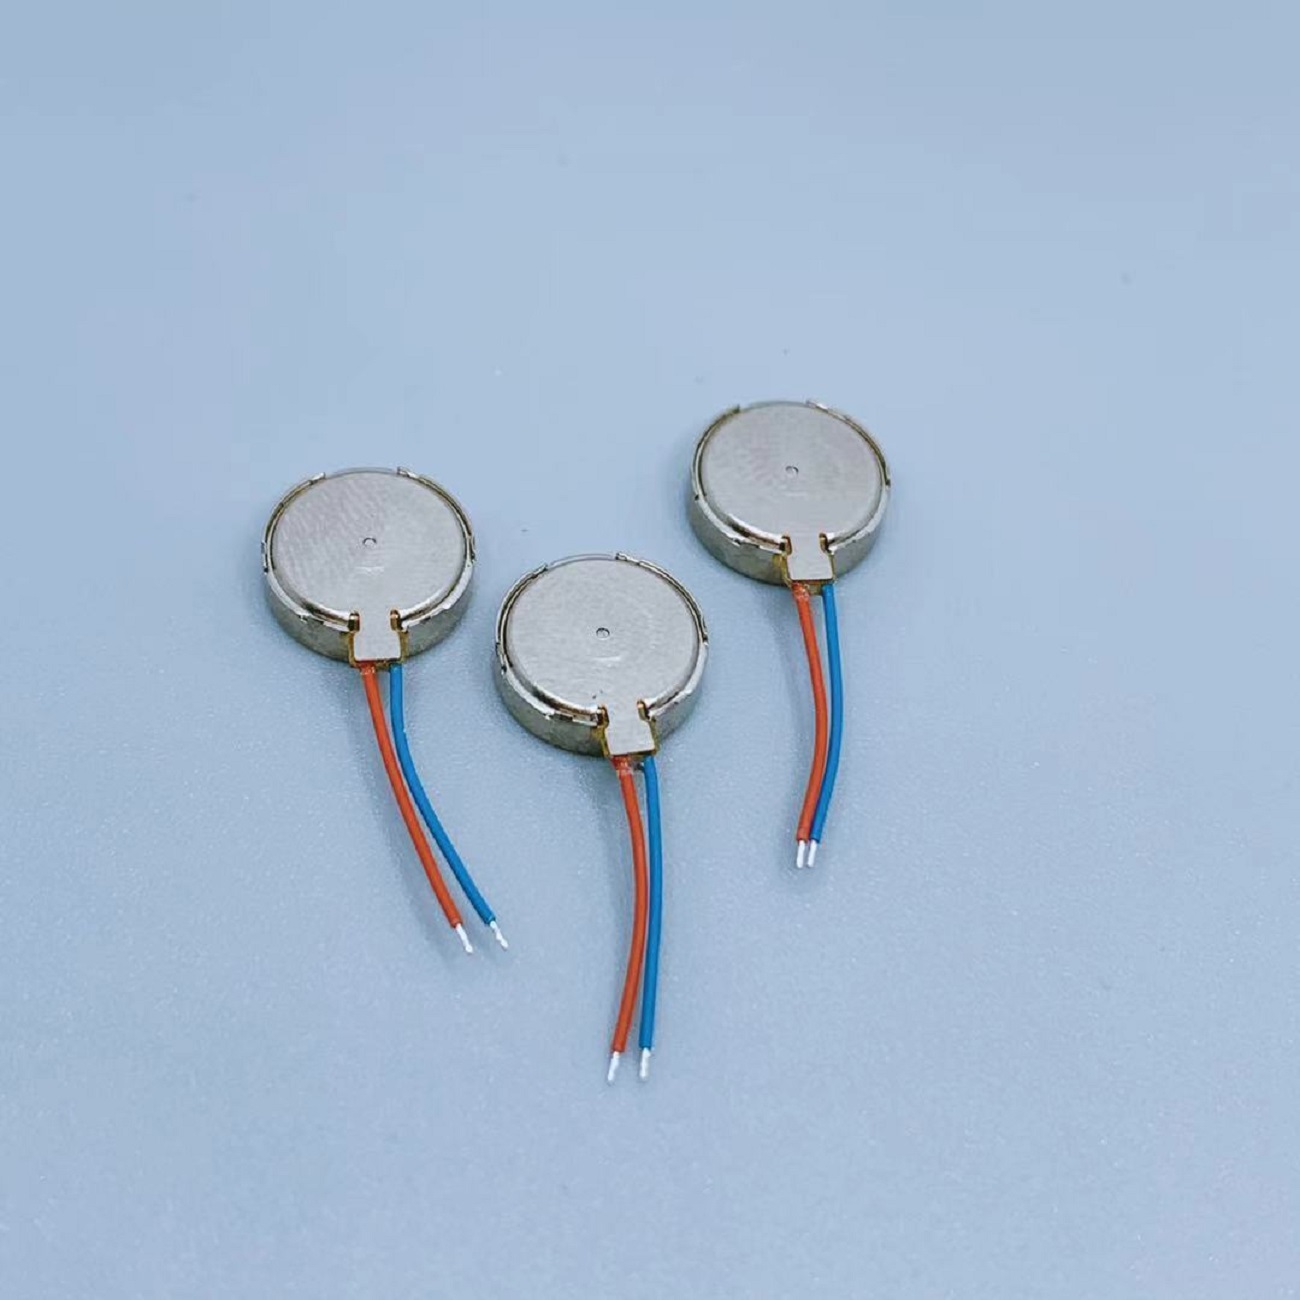 OEM/ODM Manufacturer Stepper Motor With Encoder -
 Dia 10mm*3.4mm Micro Vibrating Motor | Coin Shaped & Electric | LEADER LCM-1034 – Leader Microelectronics